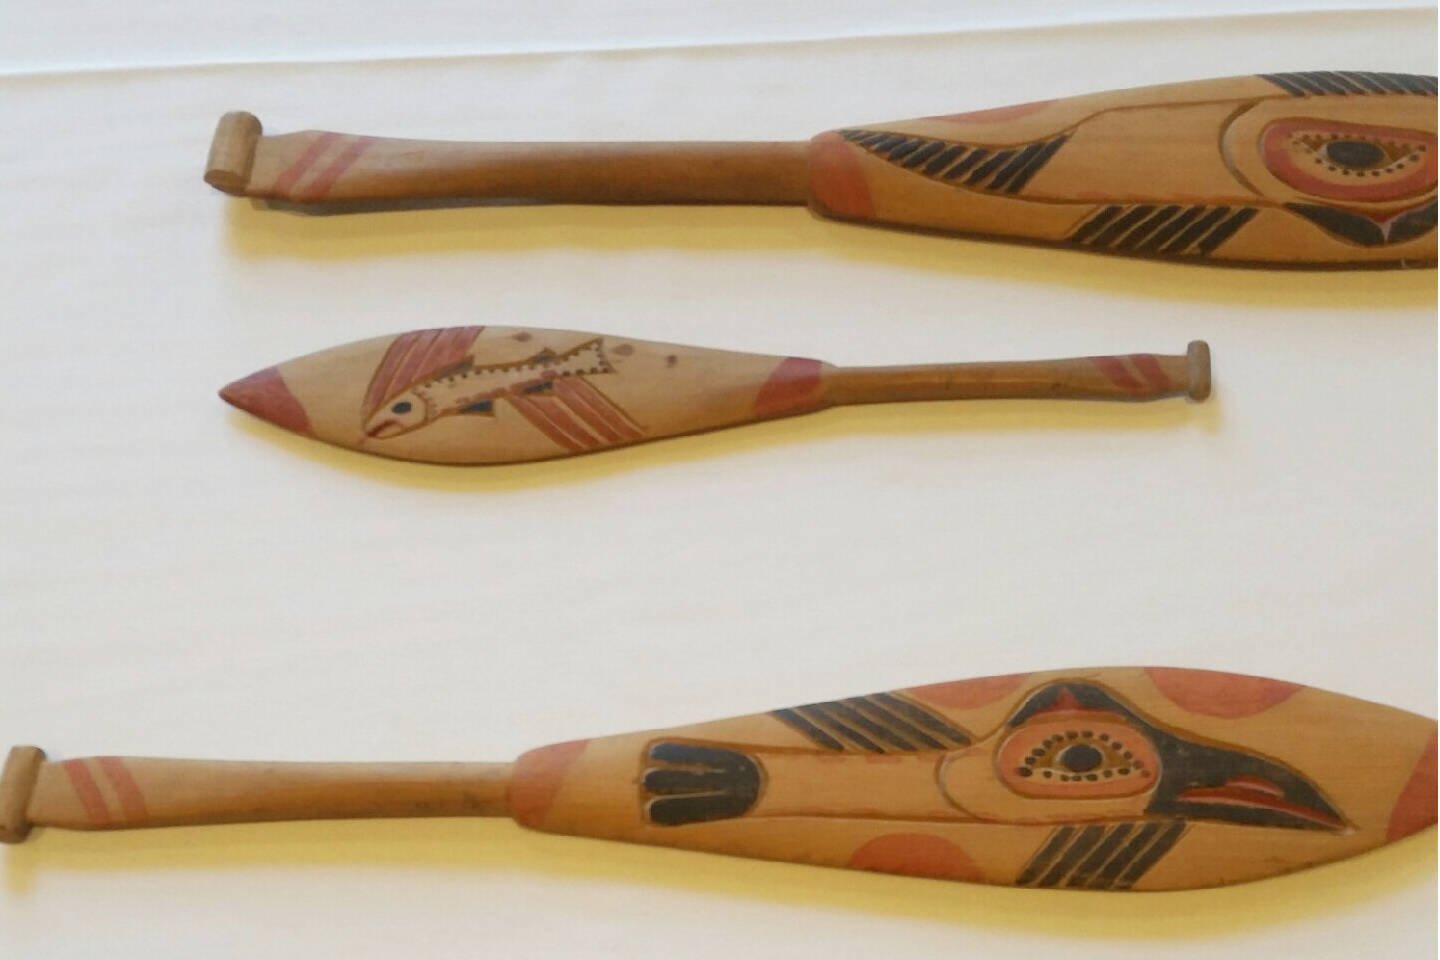 Ceremonial paddles were among the 25 artifacts repatriated by Organized Village of Kake. (Courtesy / Frank Hughes)